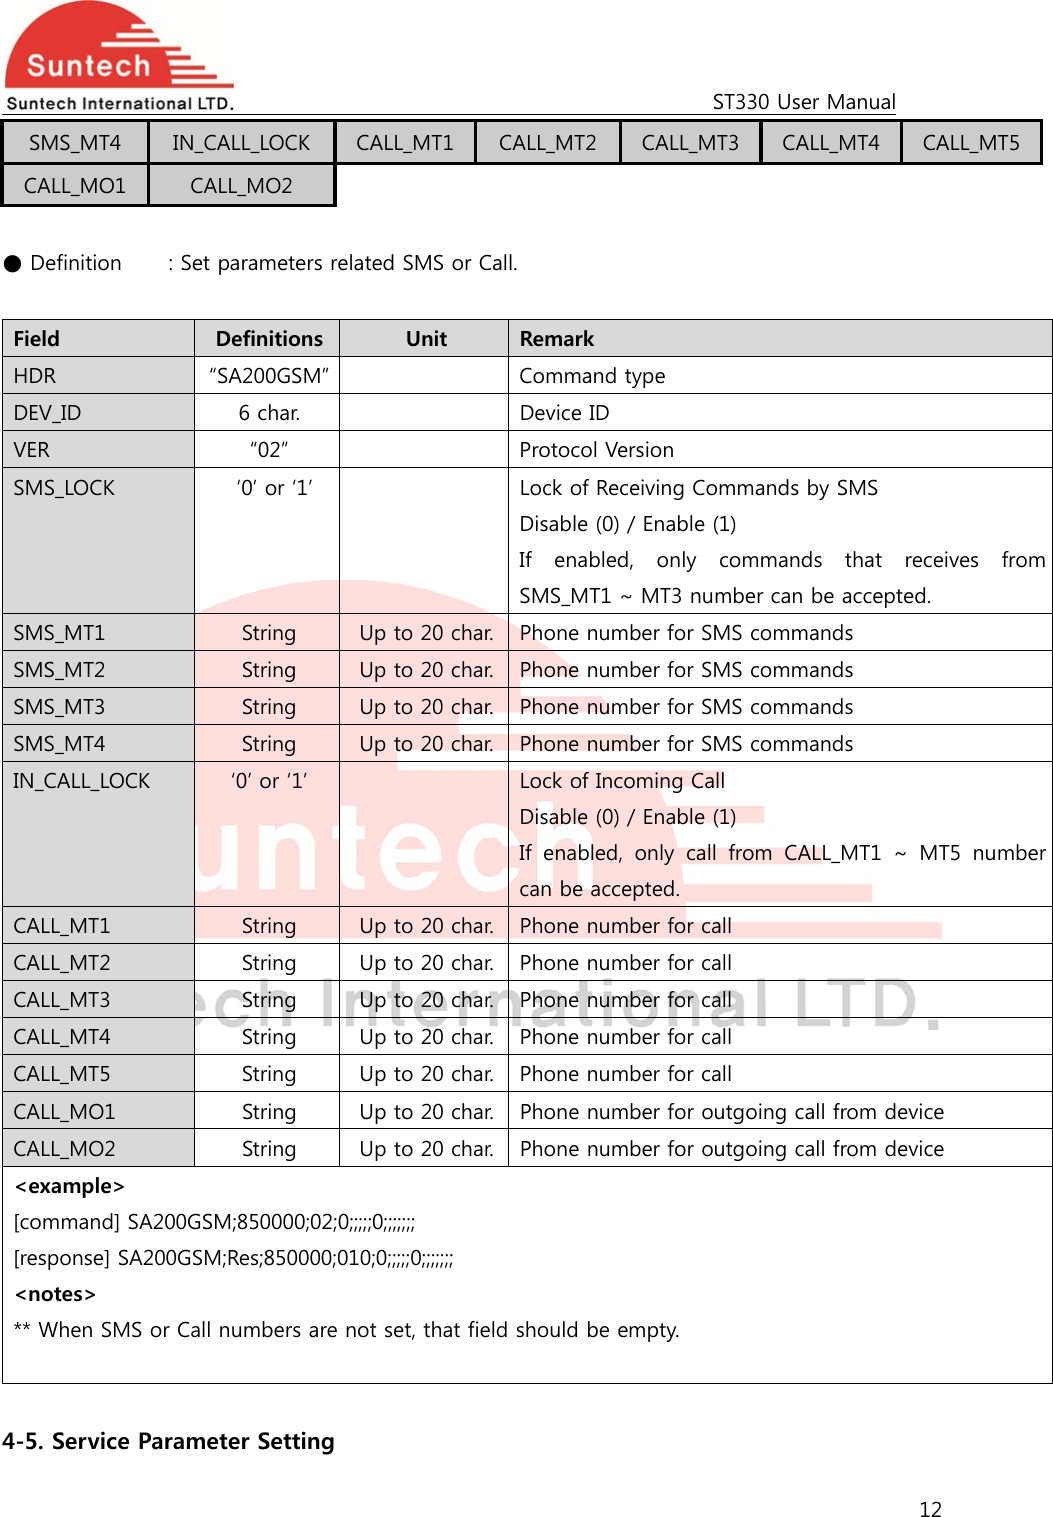                                                                                             ST330 User Manual 12  SMS_MT4  IN_CALL_LOCK  CALL_MT1  CALL_MT2  CALL_MT3  CALL_MT4  CALL_MT5 CALL_MO1  CALL_MO2  ● Definition   : Set parameters related SMS or Call.  Field  Definitions  Unit  Remark HDR  “SA200GSM”    Command type DEV_ID  6 char.    Device ID VER  “02”    Protocol Version SMS_LOCK    ‘0’ or ‘1’    Lock of Receiving Commands by SMS Disable (0) / Enable (1) If enabled, only commands that receives from SMS_MT1 ~ MT3 number can be accepted.  SMS_MT1  String  Up to 20 char. Phone number for SMS commands SMS_MT2  String  Up to 20 char. Phone number for SMS commands SMS_MT3  String  Up to 20 char. Phone number for SMS commands SMS_MT4  String  Up to 20 char. Phone number for SMS commands IN_CALL_LOCK  ‘0’ or ‘1’    Lock of Incoming Call Disable (0) / Enable (1) If  enabled,  only  call  from  CALL_MT1  ~  MT5  number can be accepted. CALL_MT1  String  Up to 20 char. Phone number for call CALL_MT2  String  Up to 20 char. Phone number for call CALL_MT3  String  Up to 20 char. Phone number for call CALL_MT4  String  Up to 20 char. Phone number for call CALL_MT5  String  Up to 20 char. Phone number for call CALL_MO1  String  Up to 20 char. Phone number for outgoing call from device CALL_MO2  String  Up to 20 char. Phone number for outgoing call from device &lt;example&gt; [command] SA200GSM;850000;02;0;;;;;0;;;;;;; [response] SA200GSM;Res;850000;010;0;;;;;0;;;;;;; &lt;notes&gt; ** When SMS or Call numbers are not set, that field should be empty.   4-5. Service Parameter Setting 